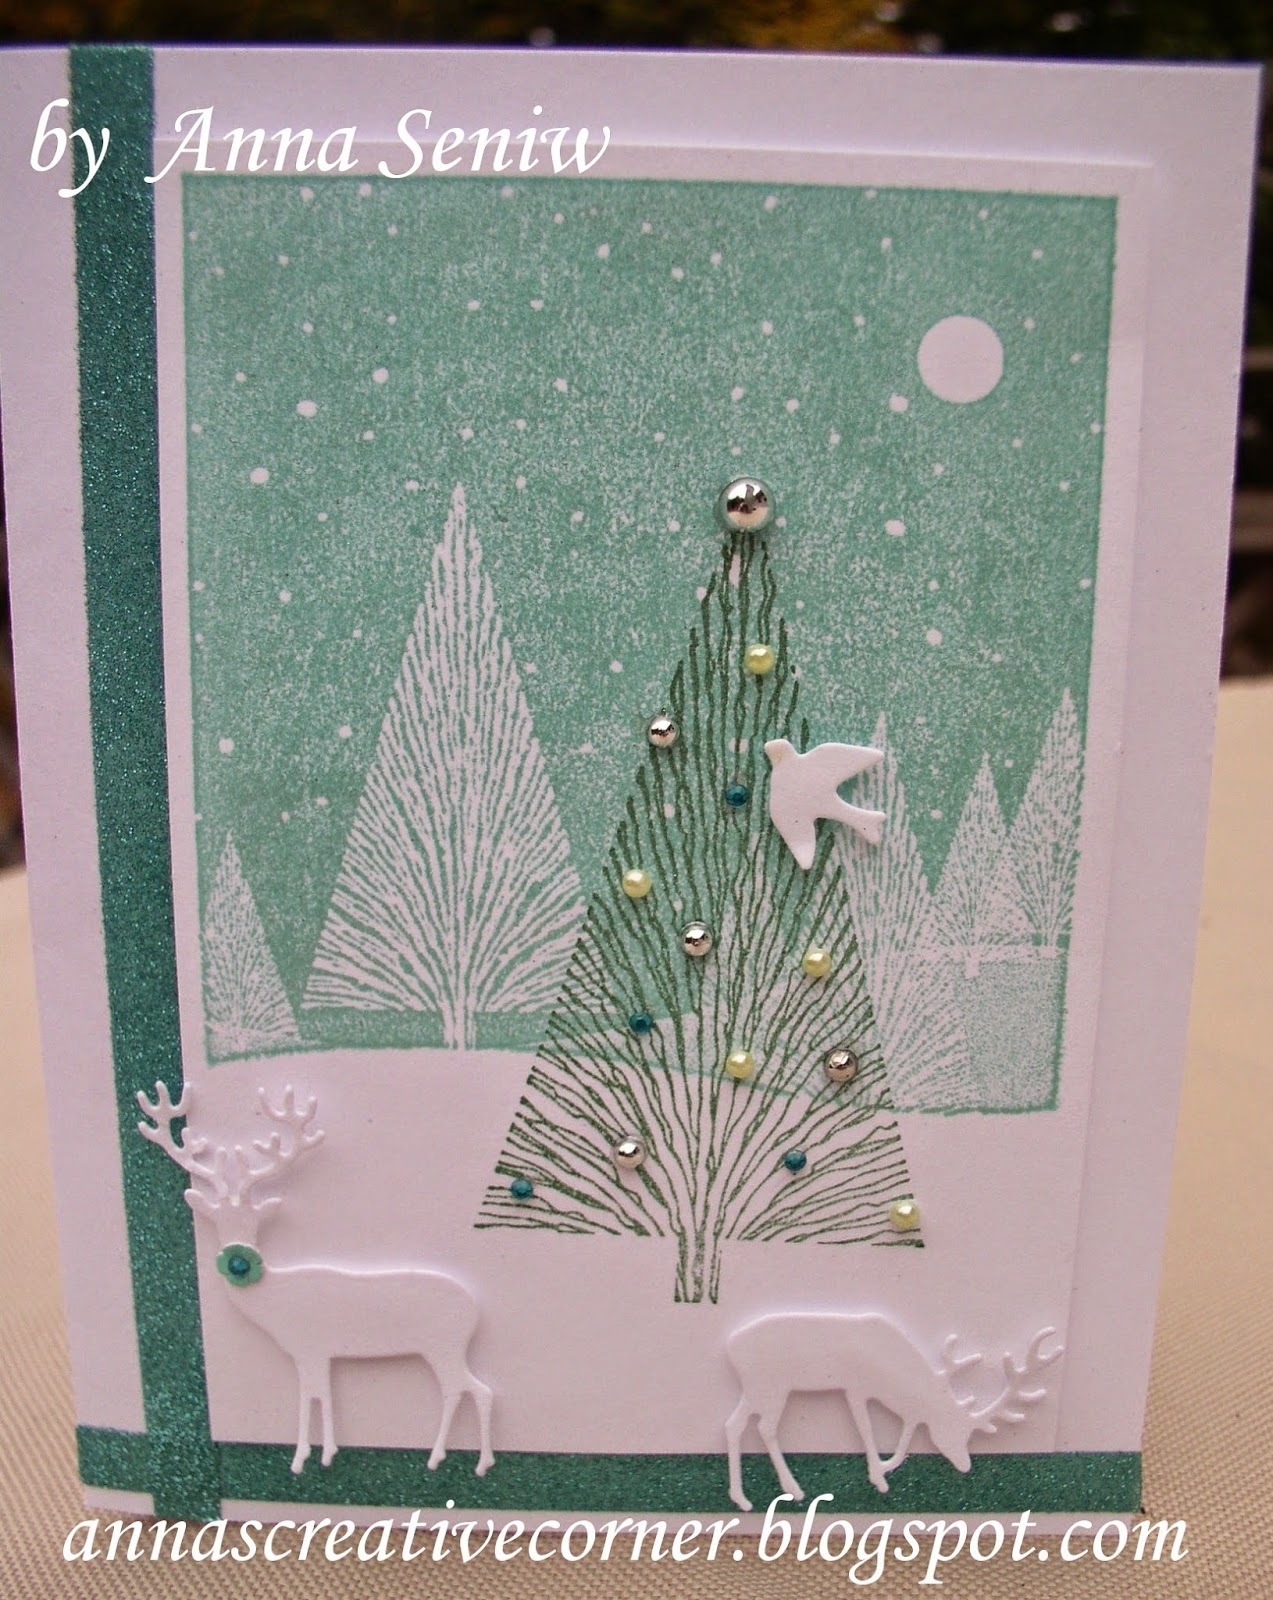 A Peek Inside The Creative Corner: Modern Christmas Cards - One Design, Three Different Colors